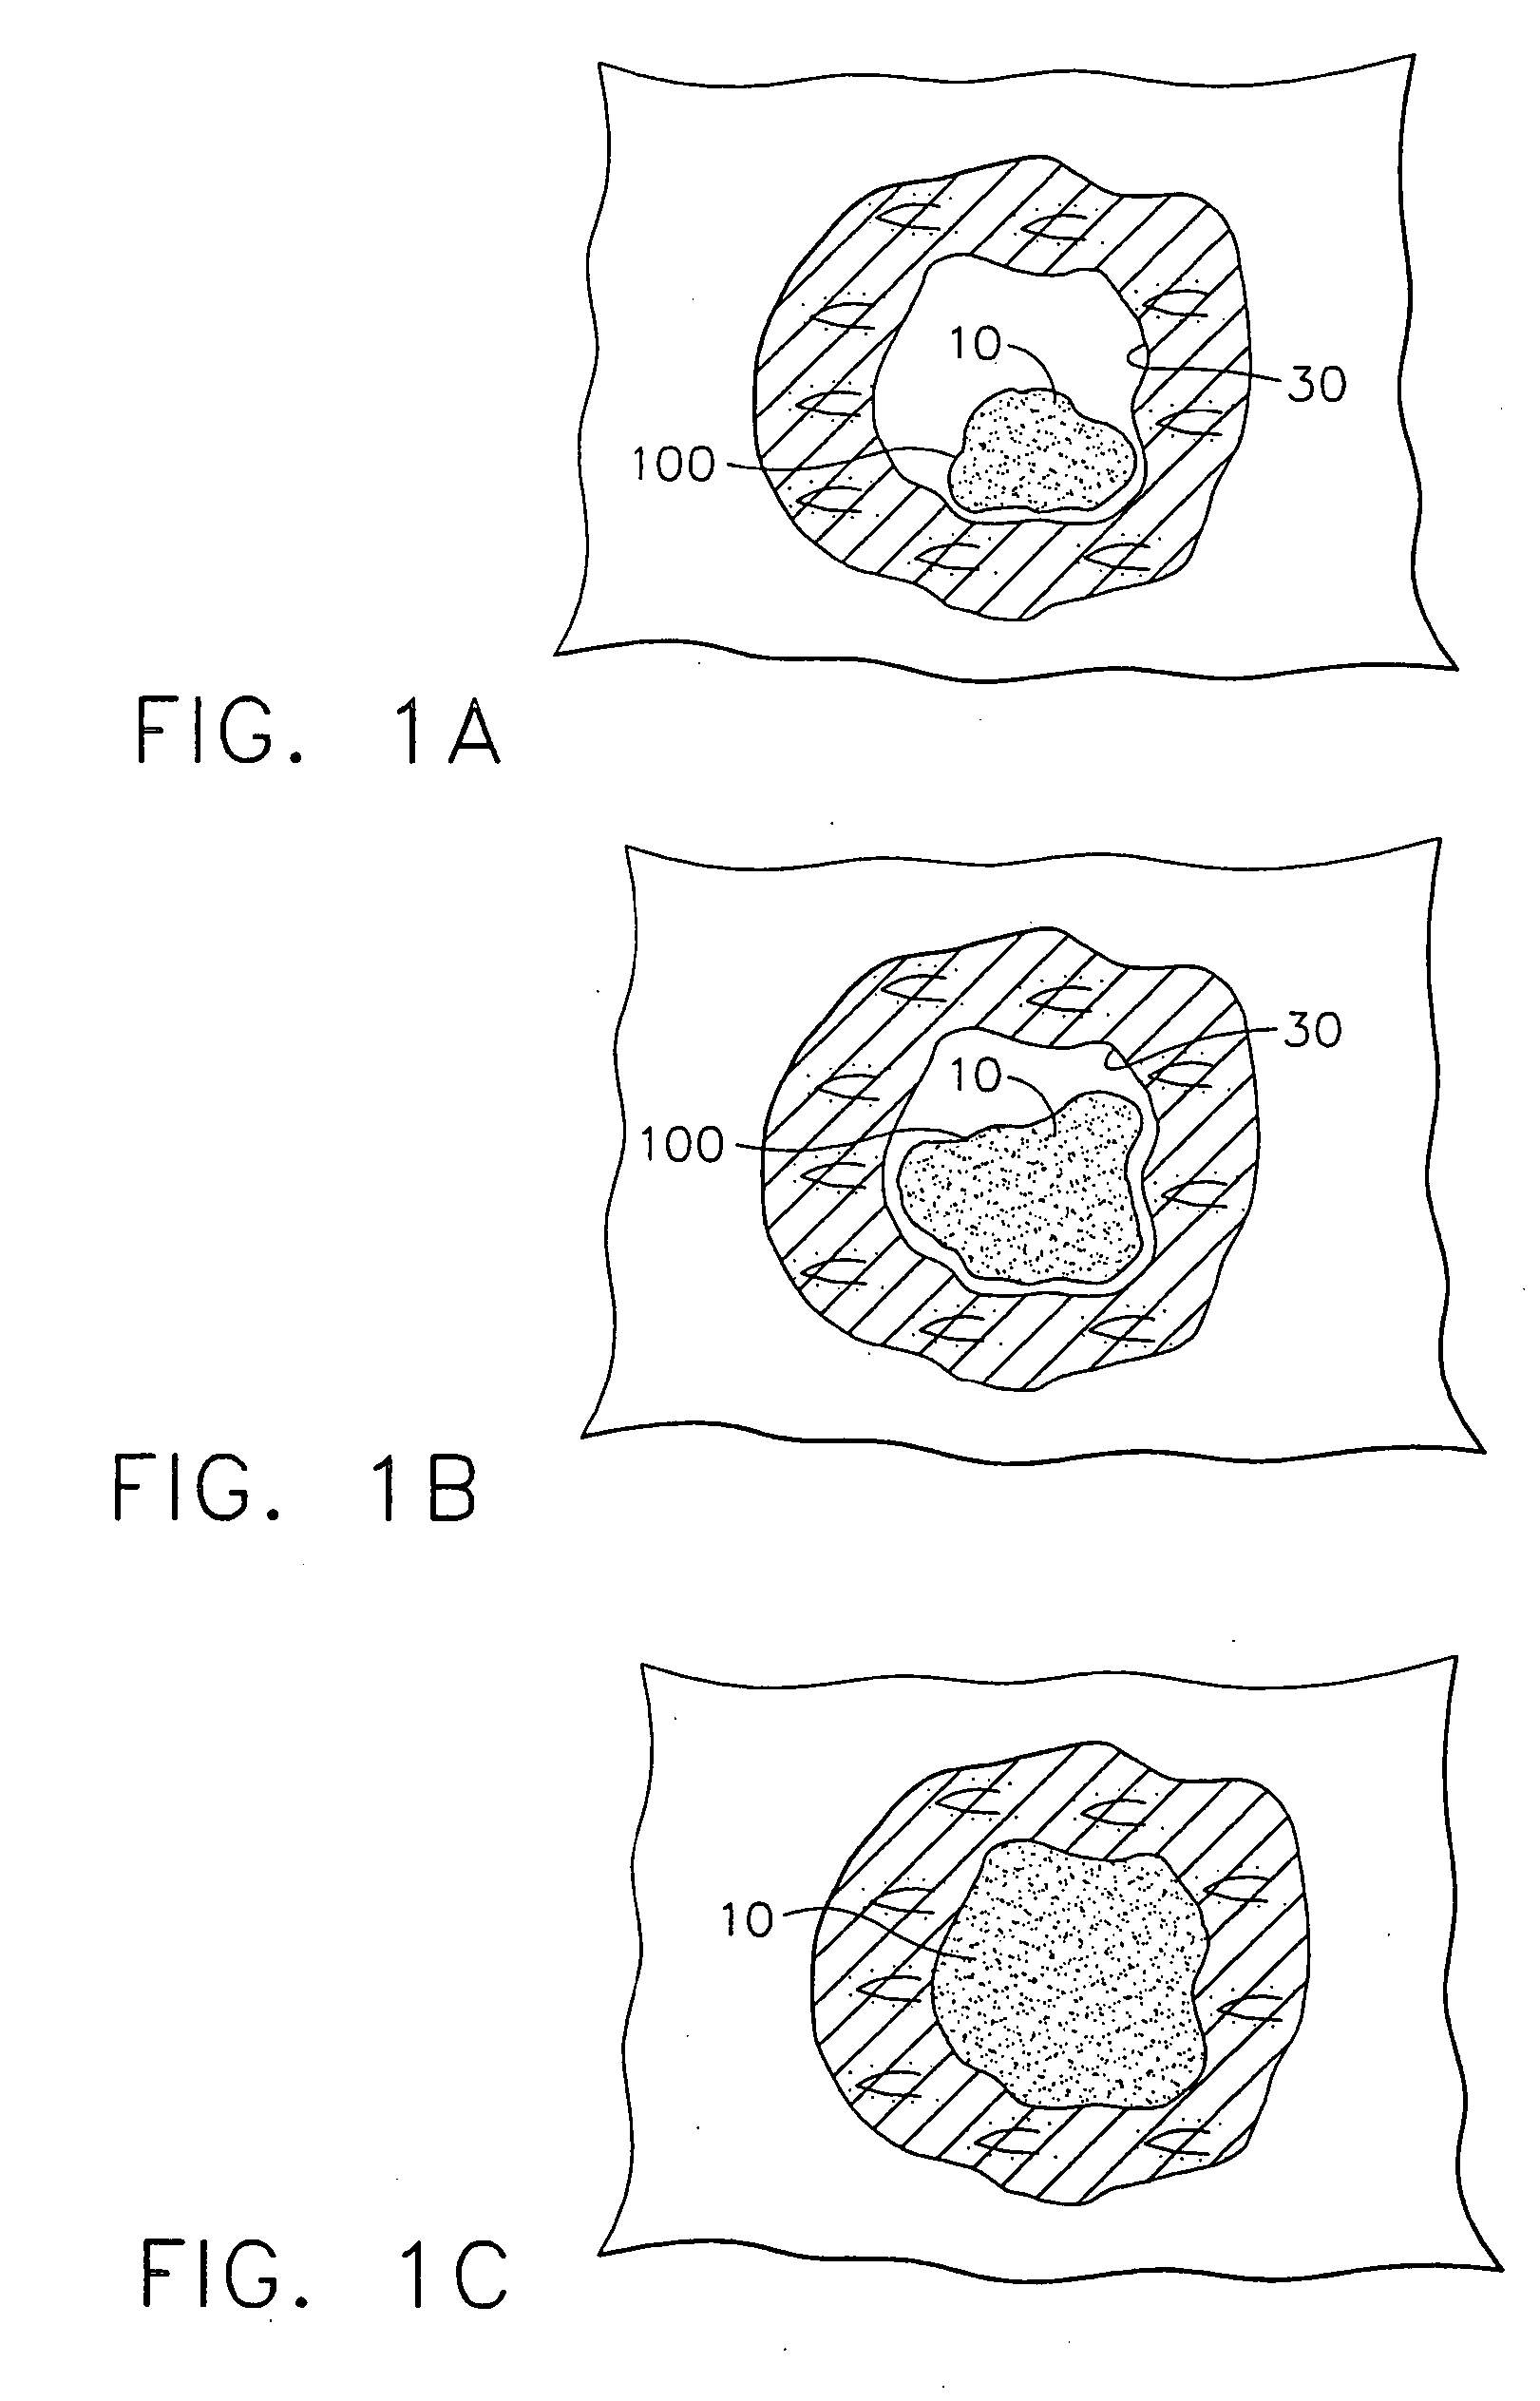 Apparatus and method for marking tissue